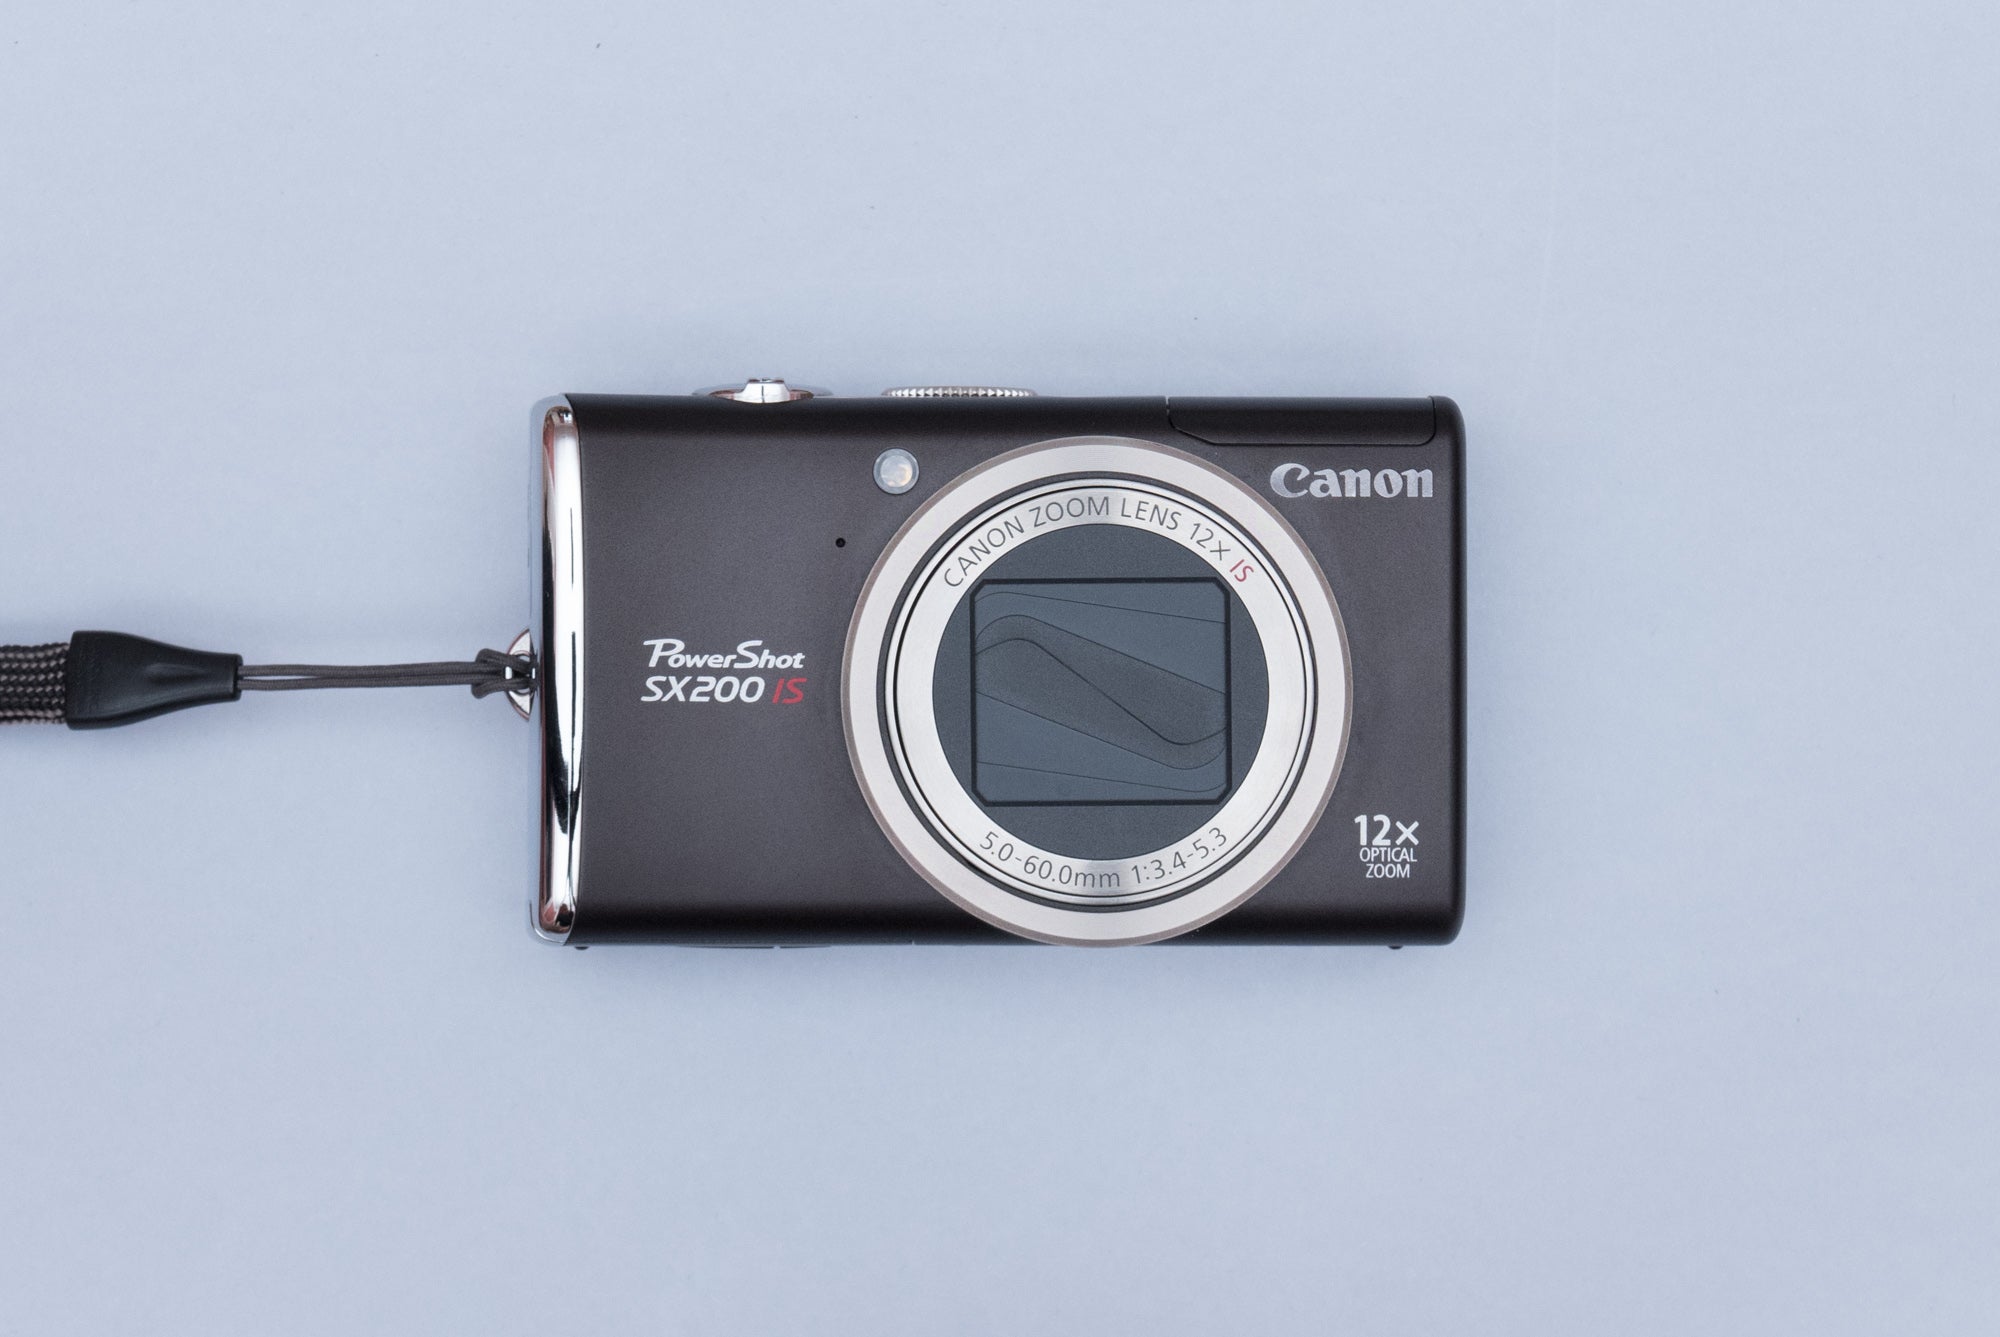 Canon PowerShot SX200 IS Compact Y2K Digital Camera – OHSOCULT Film Compacts